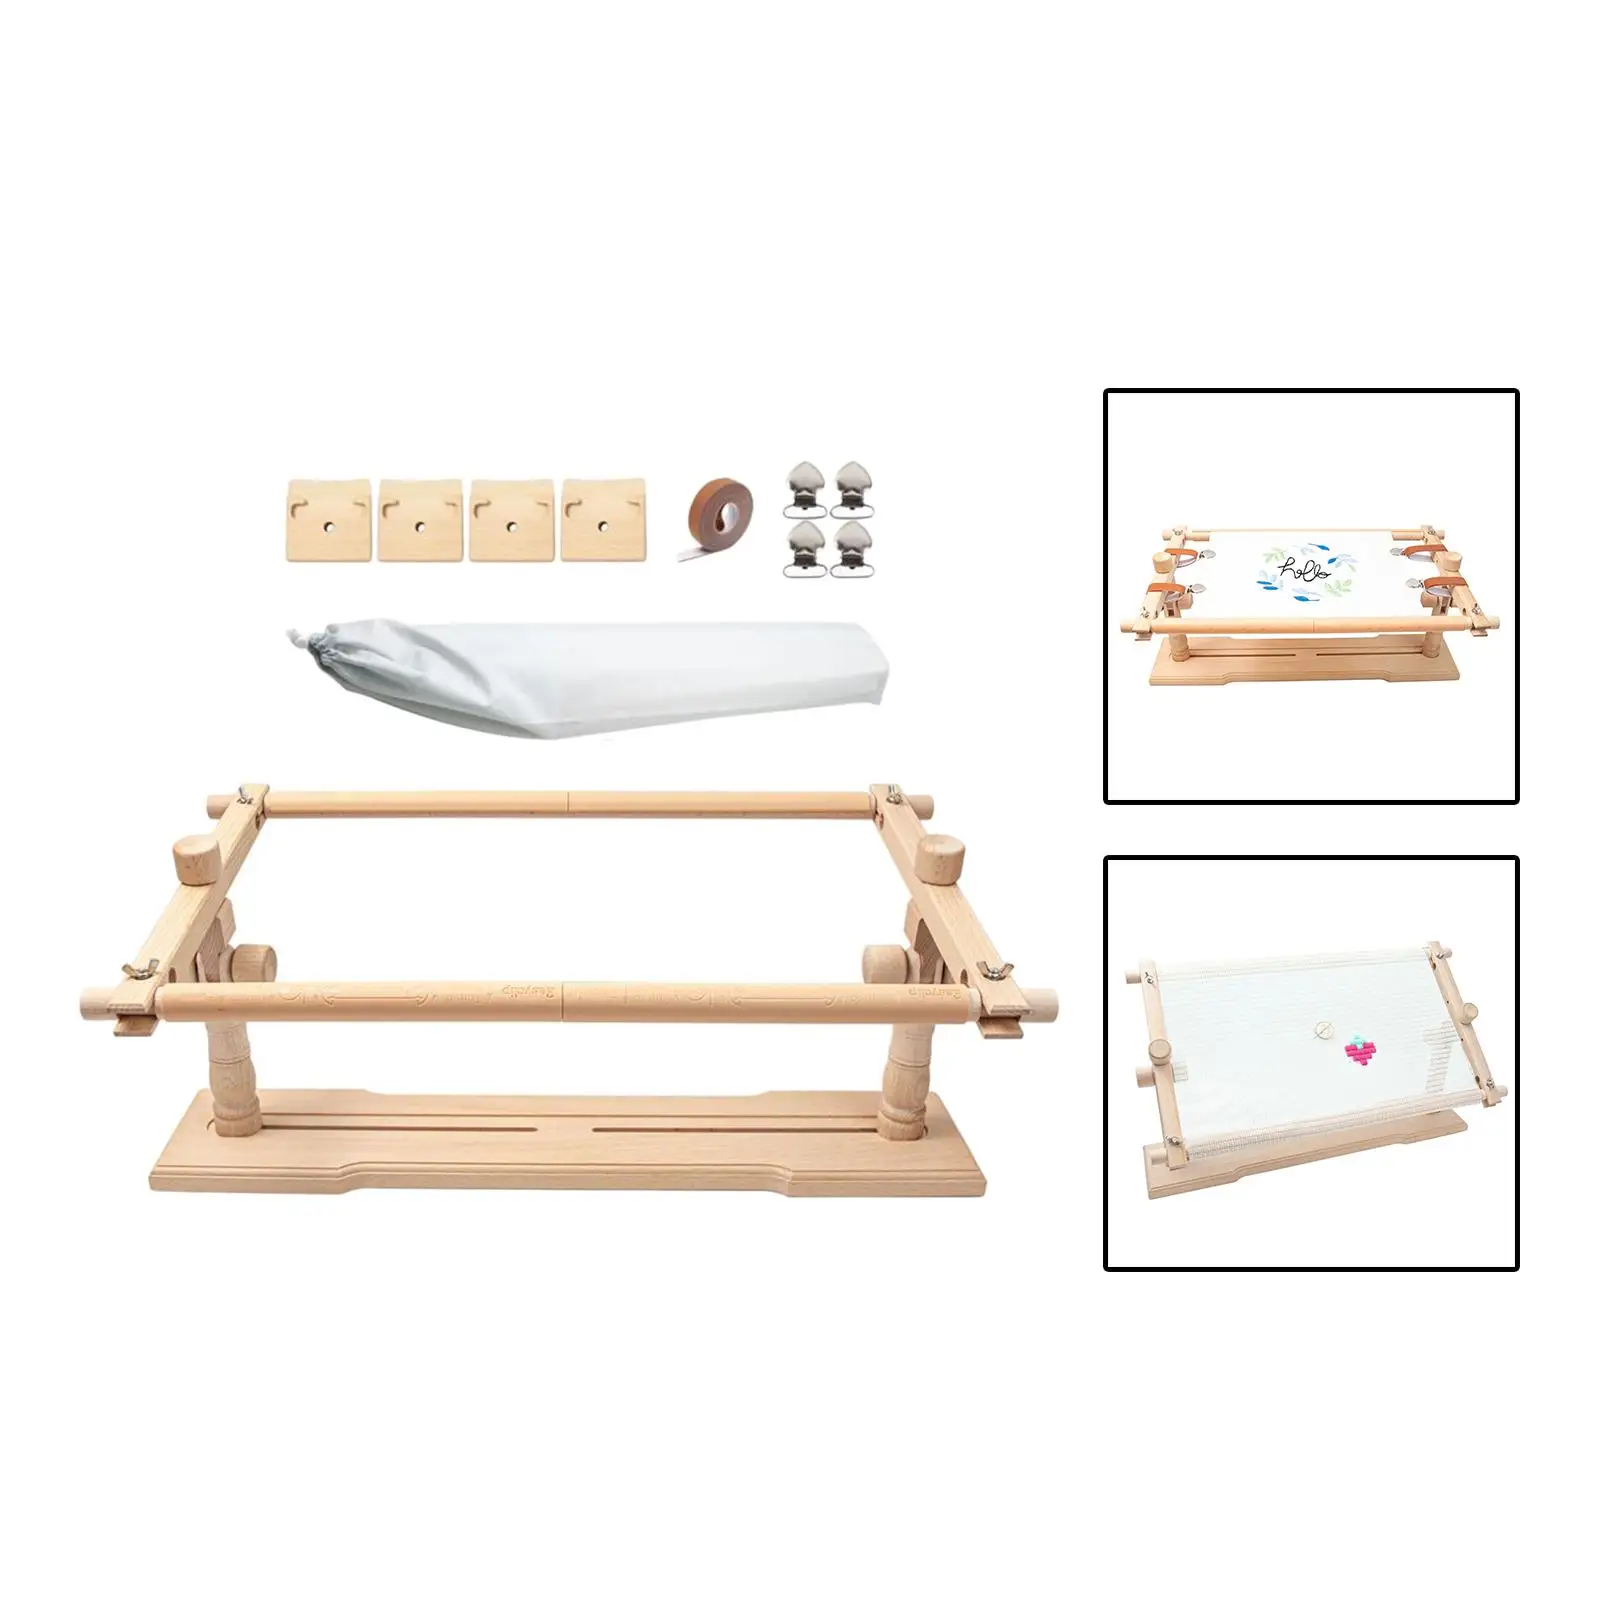 Cross Stitch Frame Scroll Fittings Tapestry Frame Present for Stitching Sewing Craft 1 Set Needlework Cross Stitch Stand Table